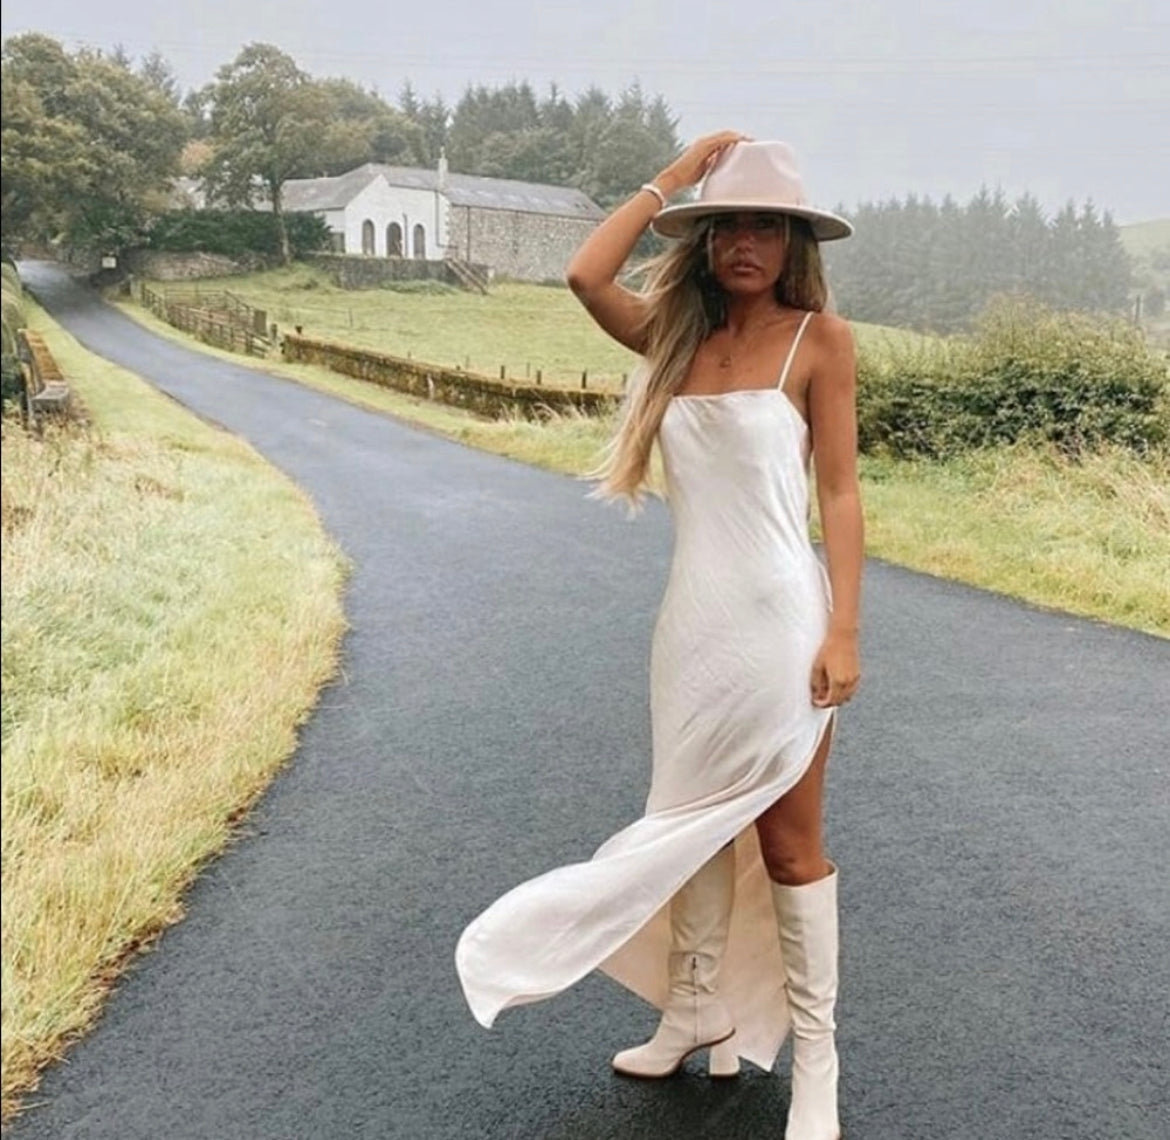 A country town, a woman is wearing a white satin gown with a thigh high split and below the knee white faux leather chunky heel boots she has her hand on her brim hat and wearing a bangle